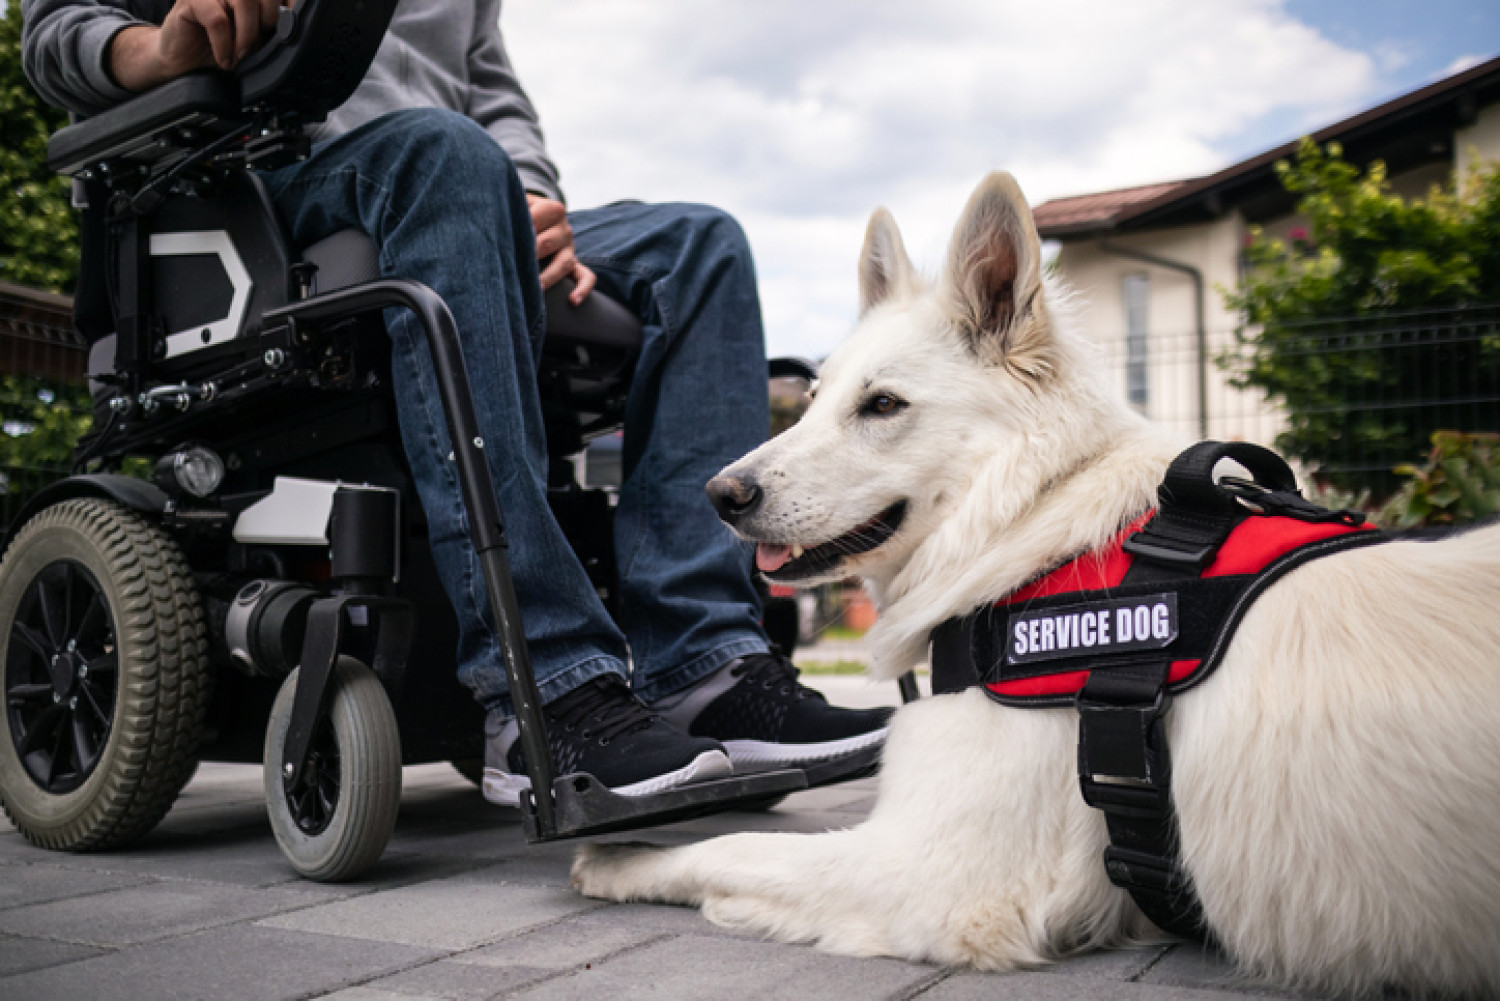 Assistant dog sitting beside a wheelchair user in an outdoor setting, wearing a red 'Service Dog' vest.